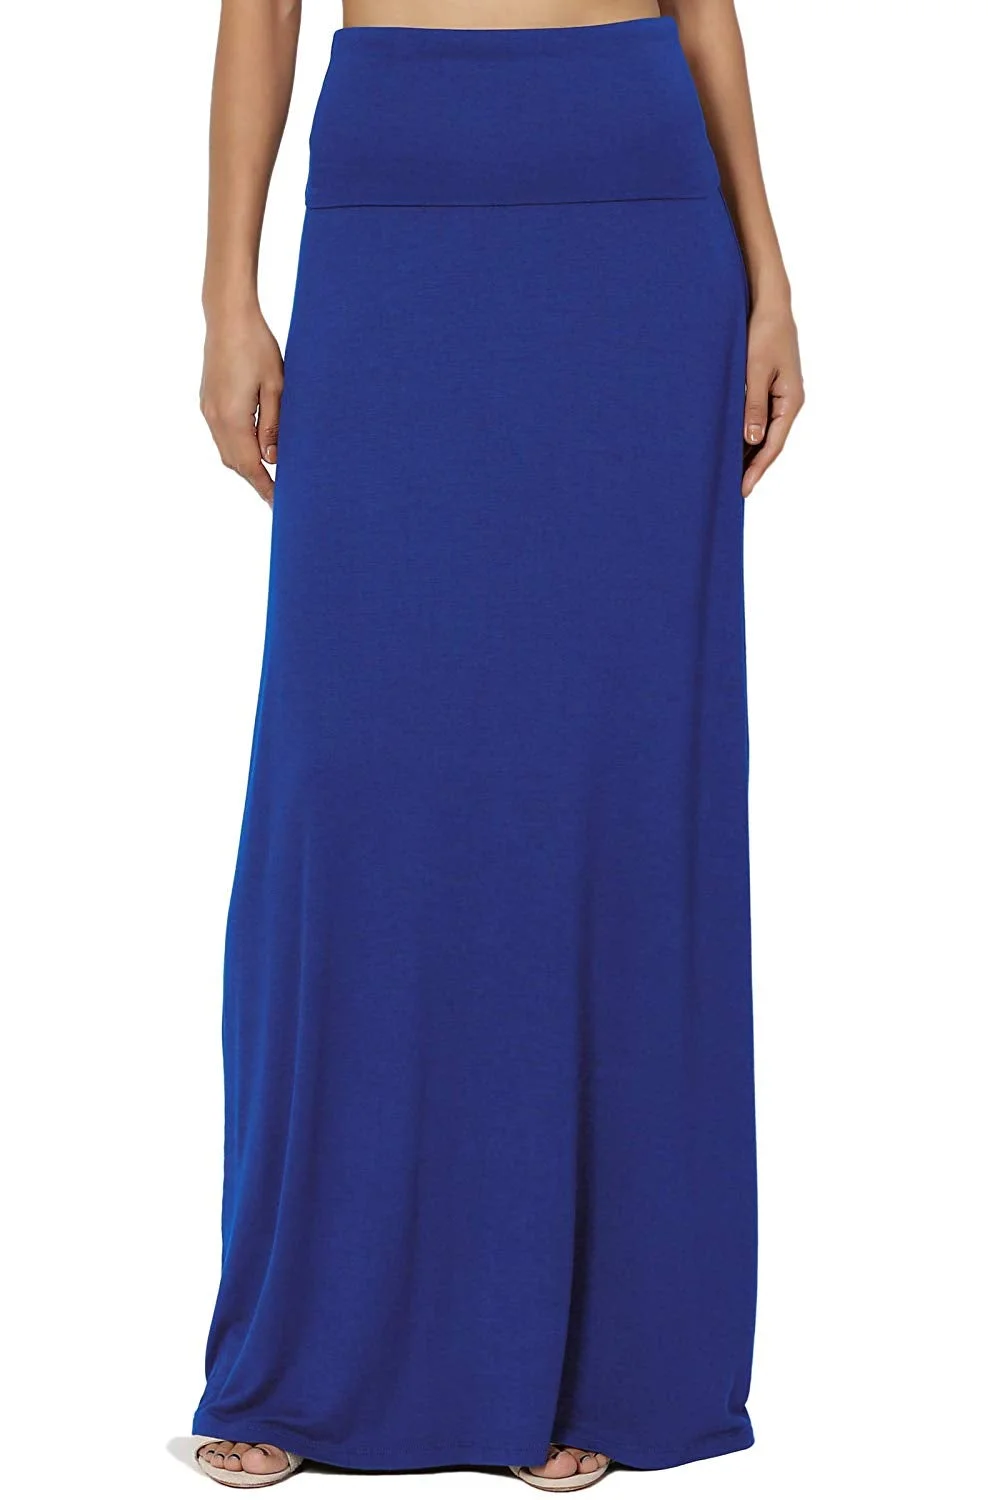 Women's Casual Lounge Solid Draped Jersey Relaxed Long Maxi Skirt